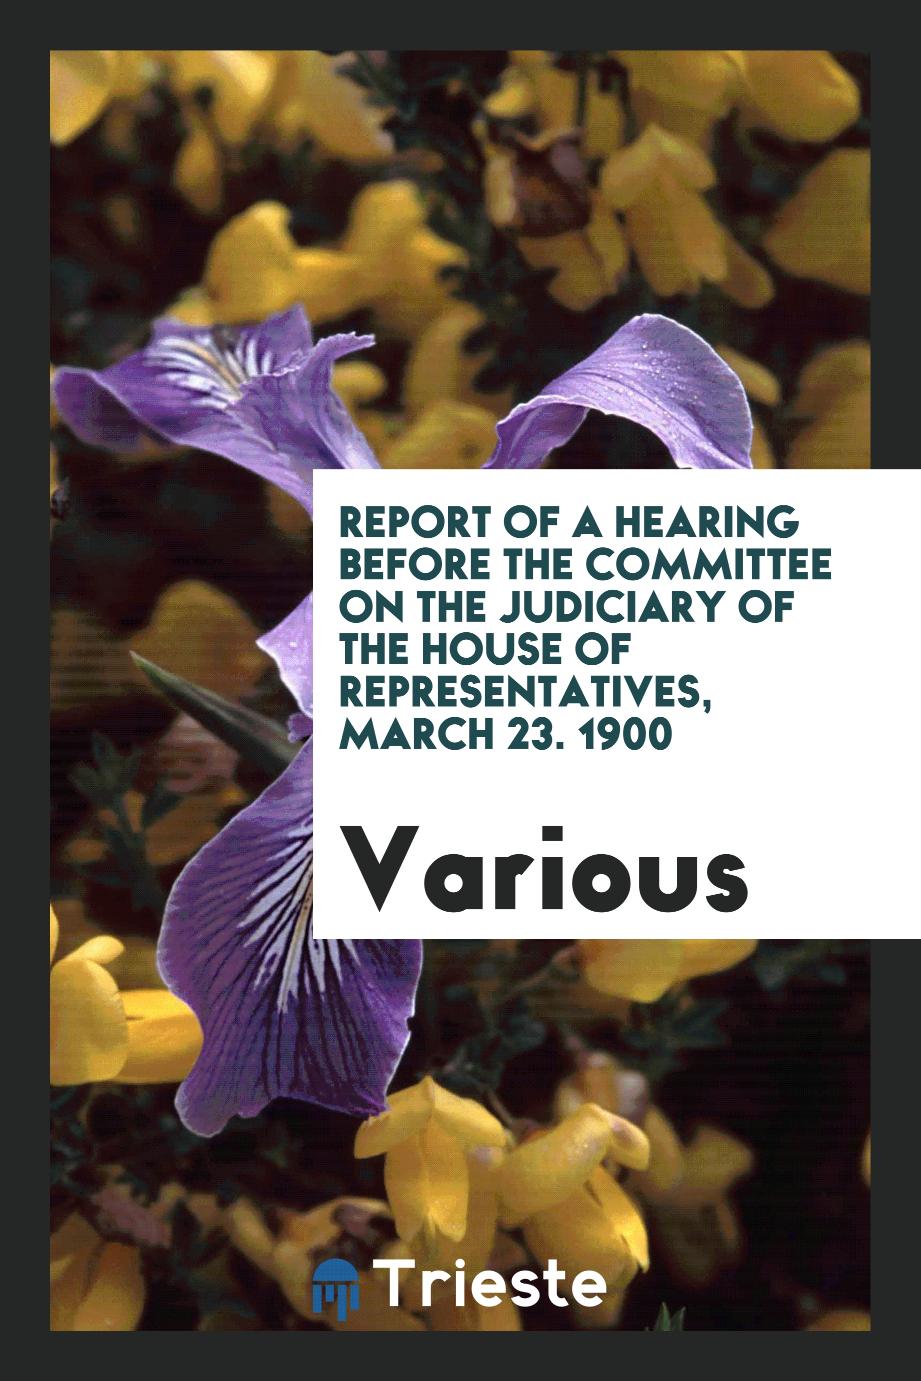 Report of a hearing before the Committee on the Judiciary of the House of Representatives, March 23. 1900